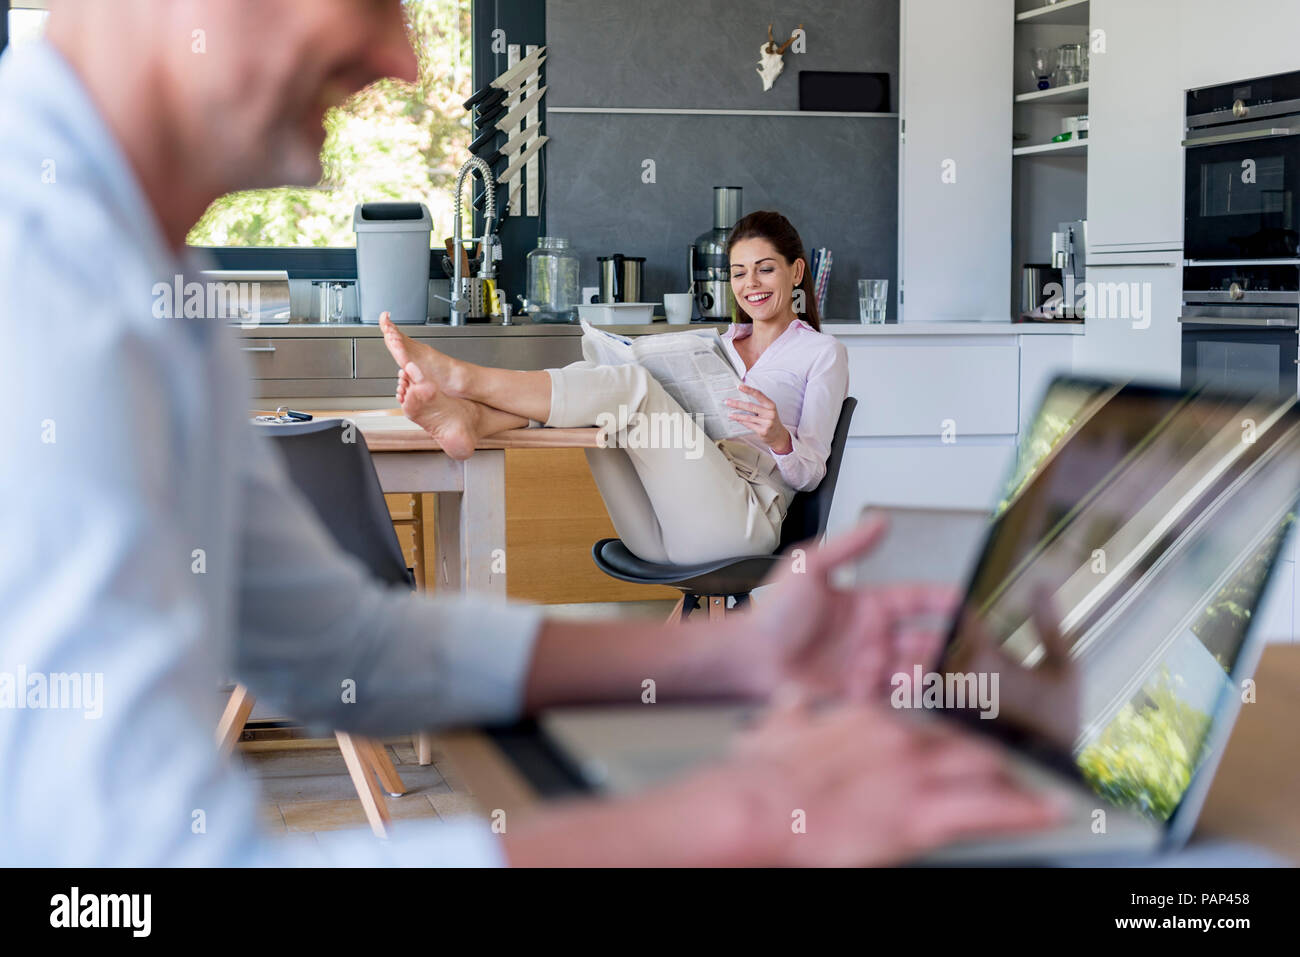 Couple at home with man using a laptop and woman reading newspaper Stock Photo